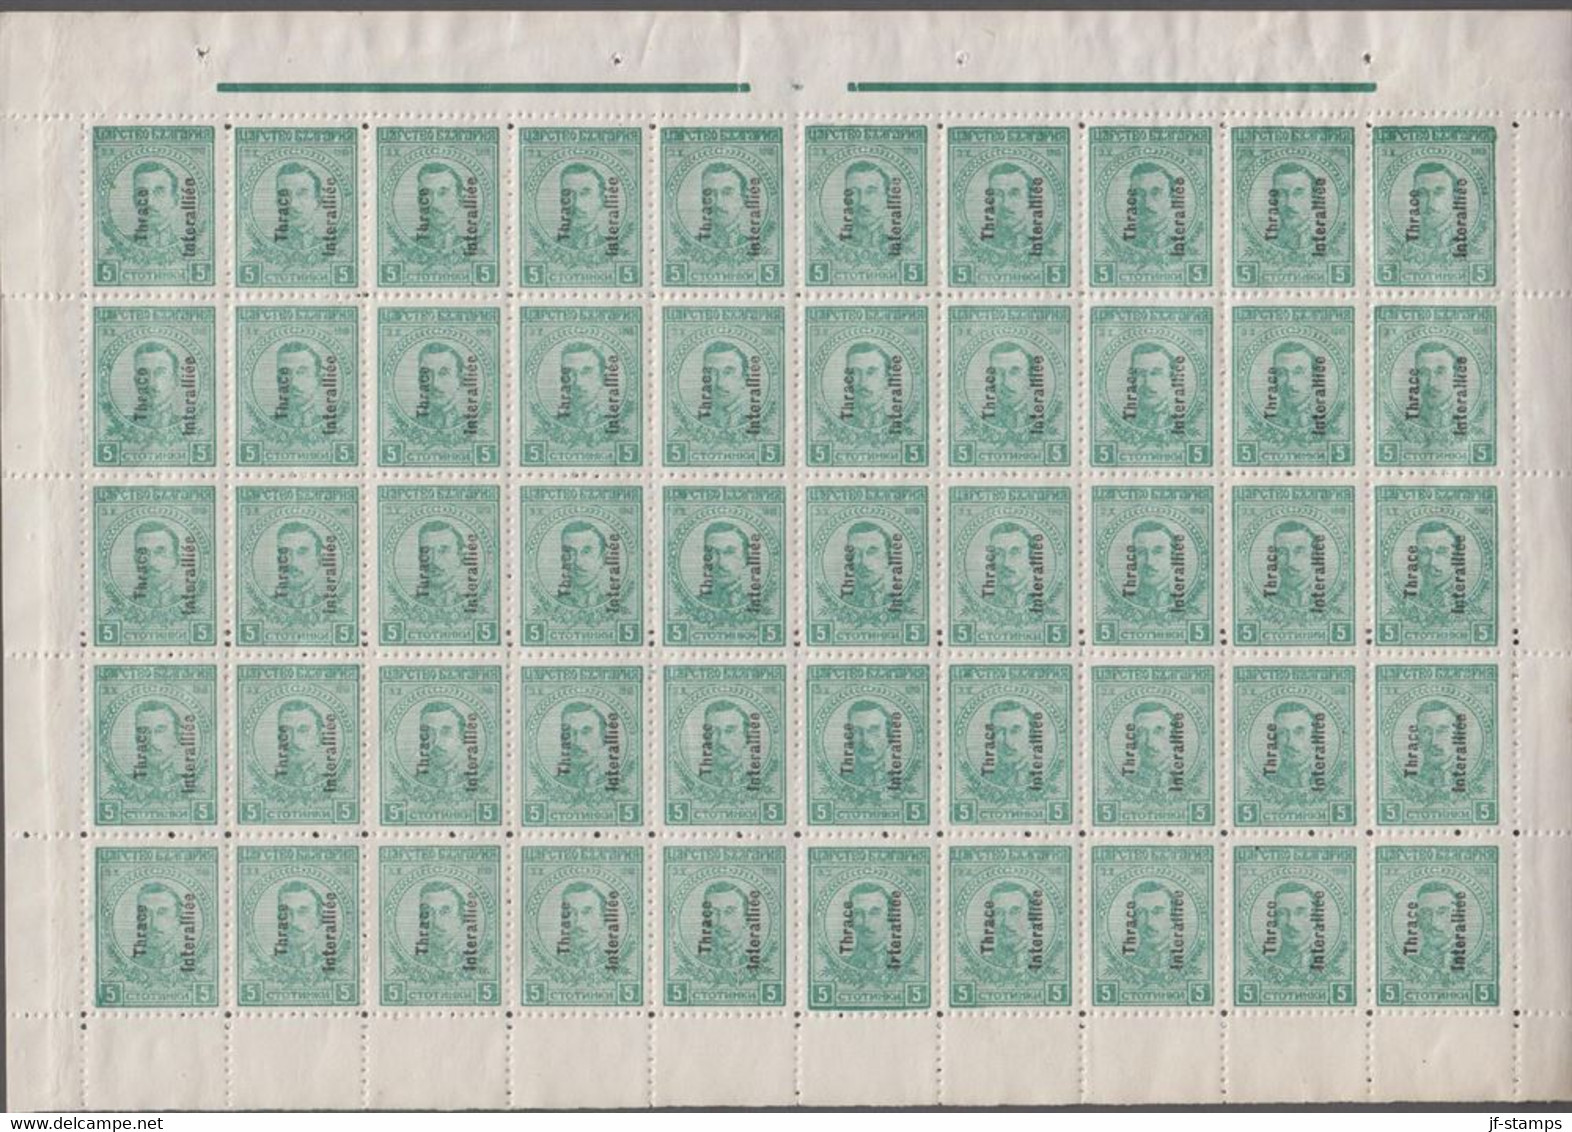 1920. THRACE INTERALLIEE. Bulgarian 5 St In Complete Sheet With 50 Stamps With Overprint Thrac... (Michel 16) - JF527355 - Thrace